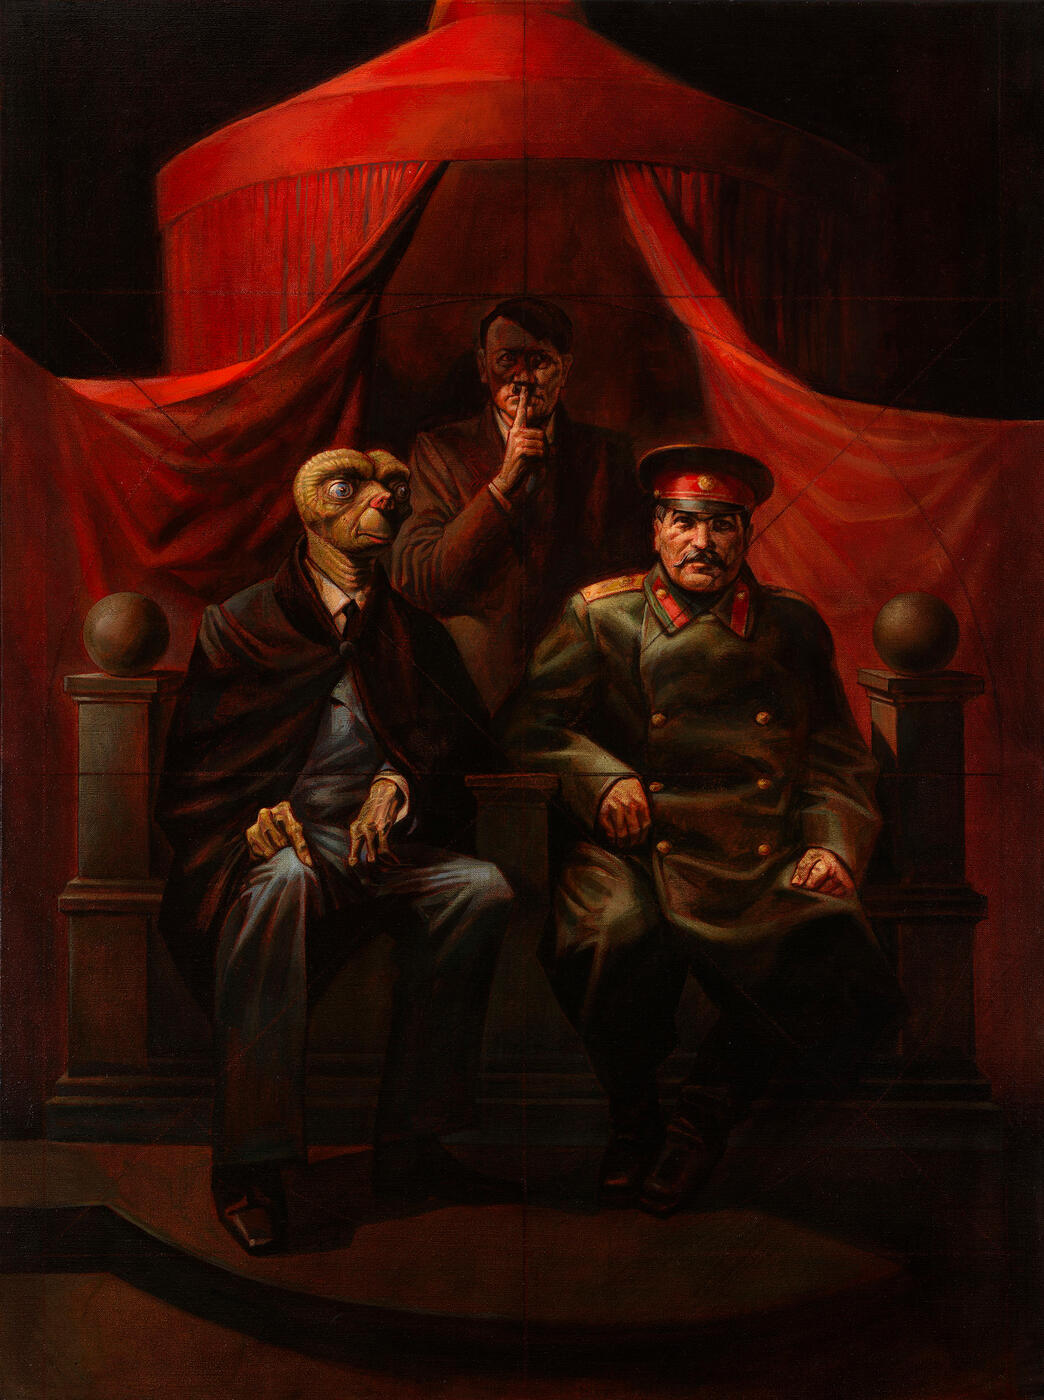 Yalta Conference, from the series “Nostalgic Socialist Realism”